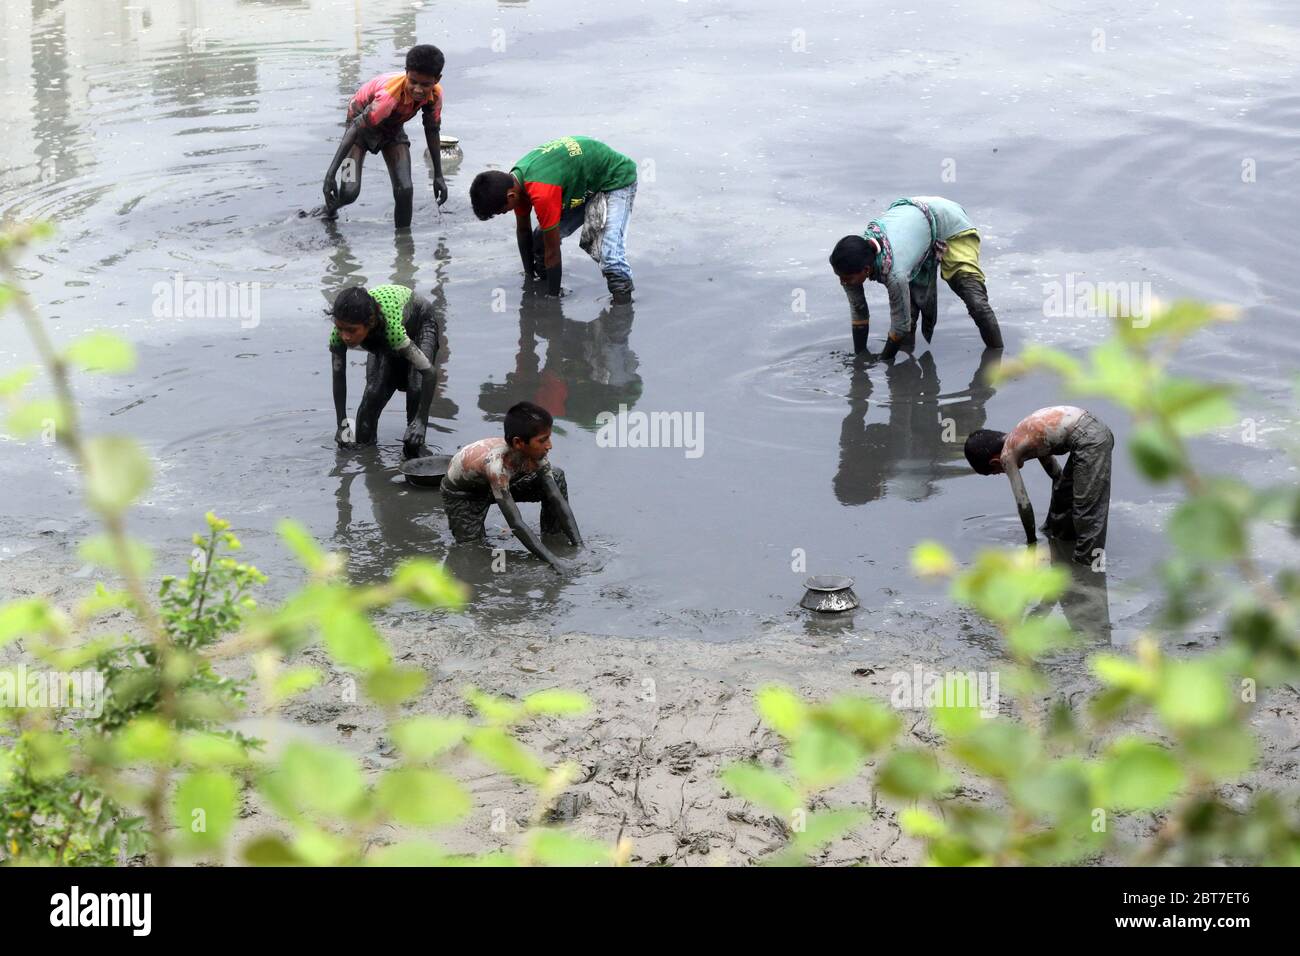 Dhaka 23 April 2015. Local people catching fish in a river at savar in Dhaka.photo by leadfoto Stock Photo